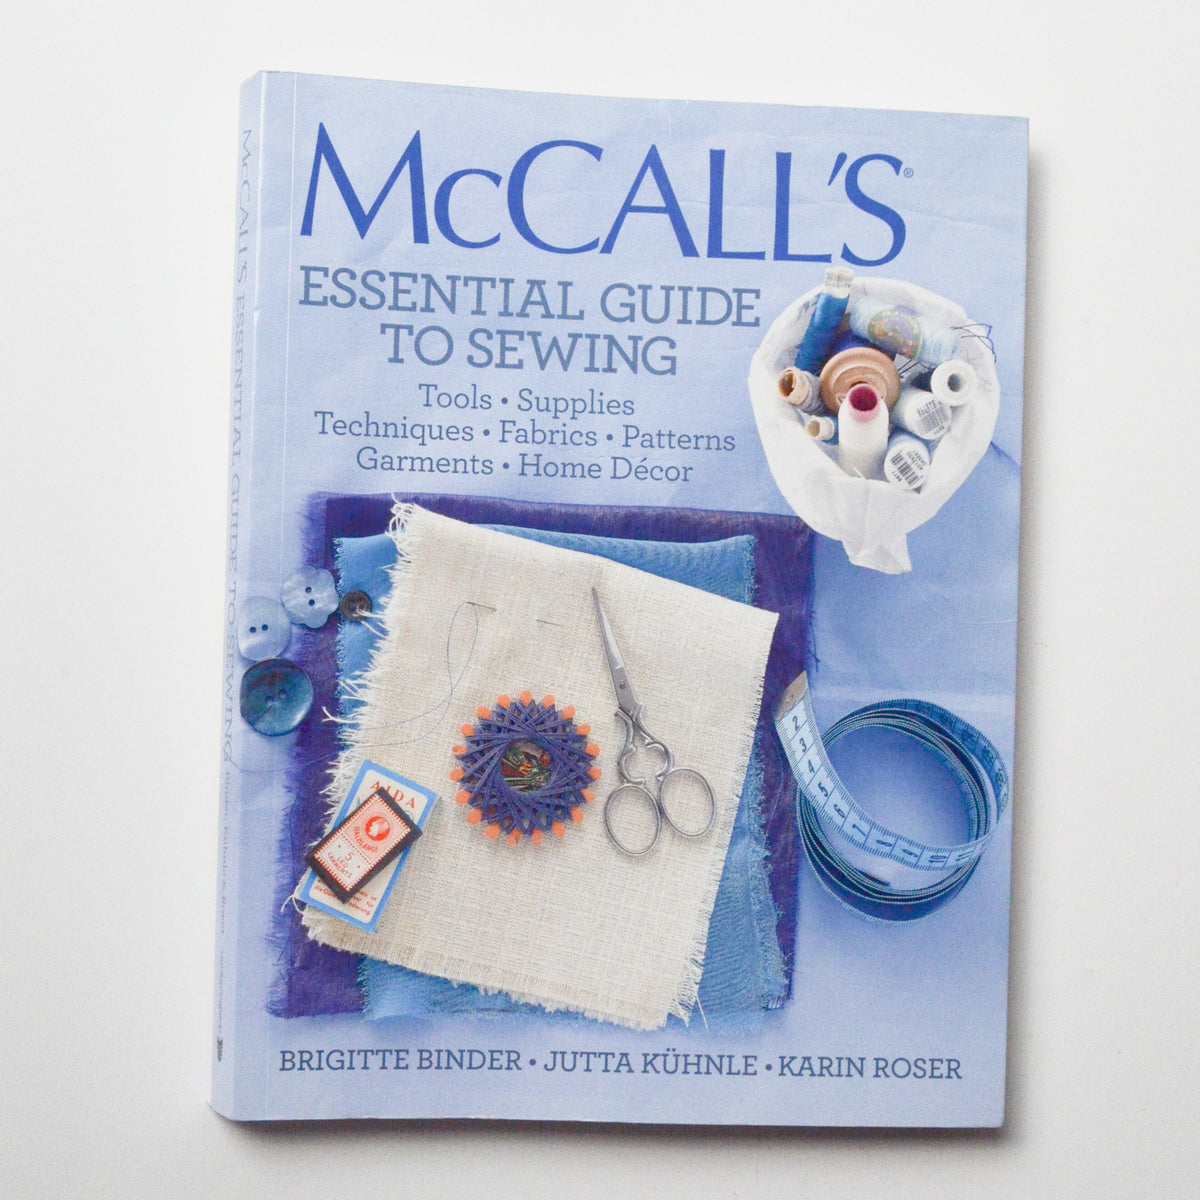 Great Sewing Accessories--to Sew [Book]